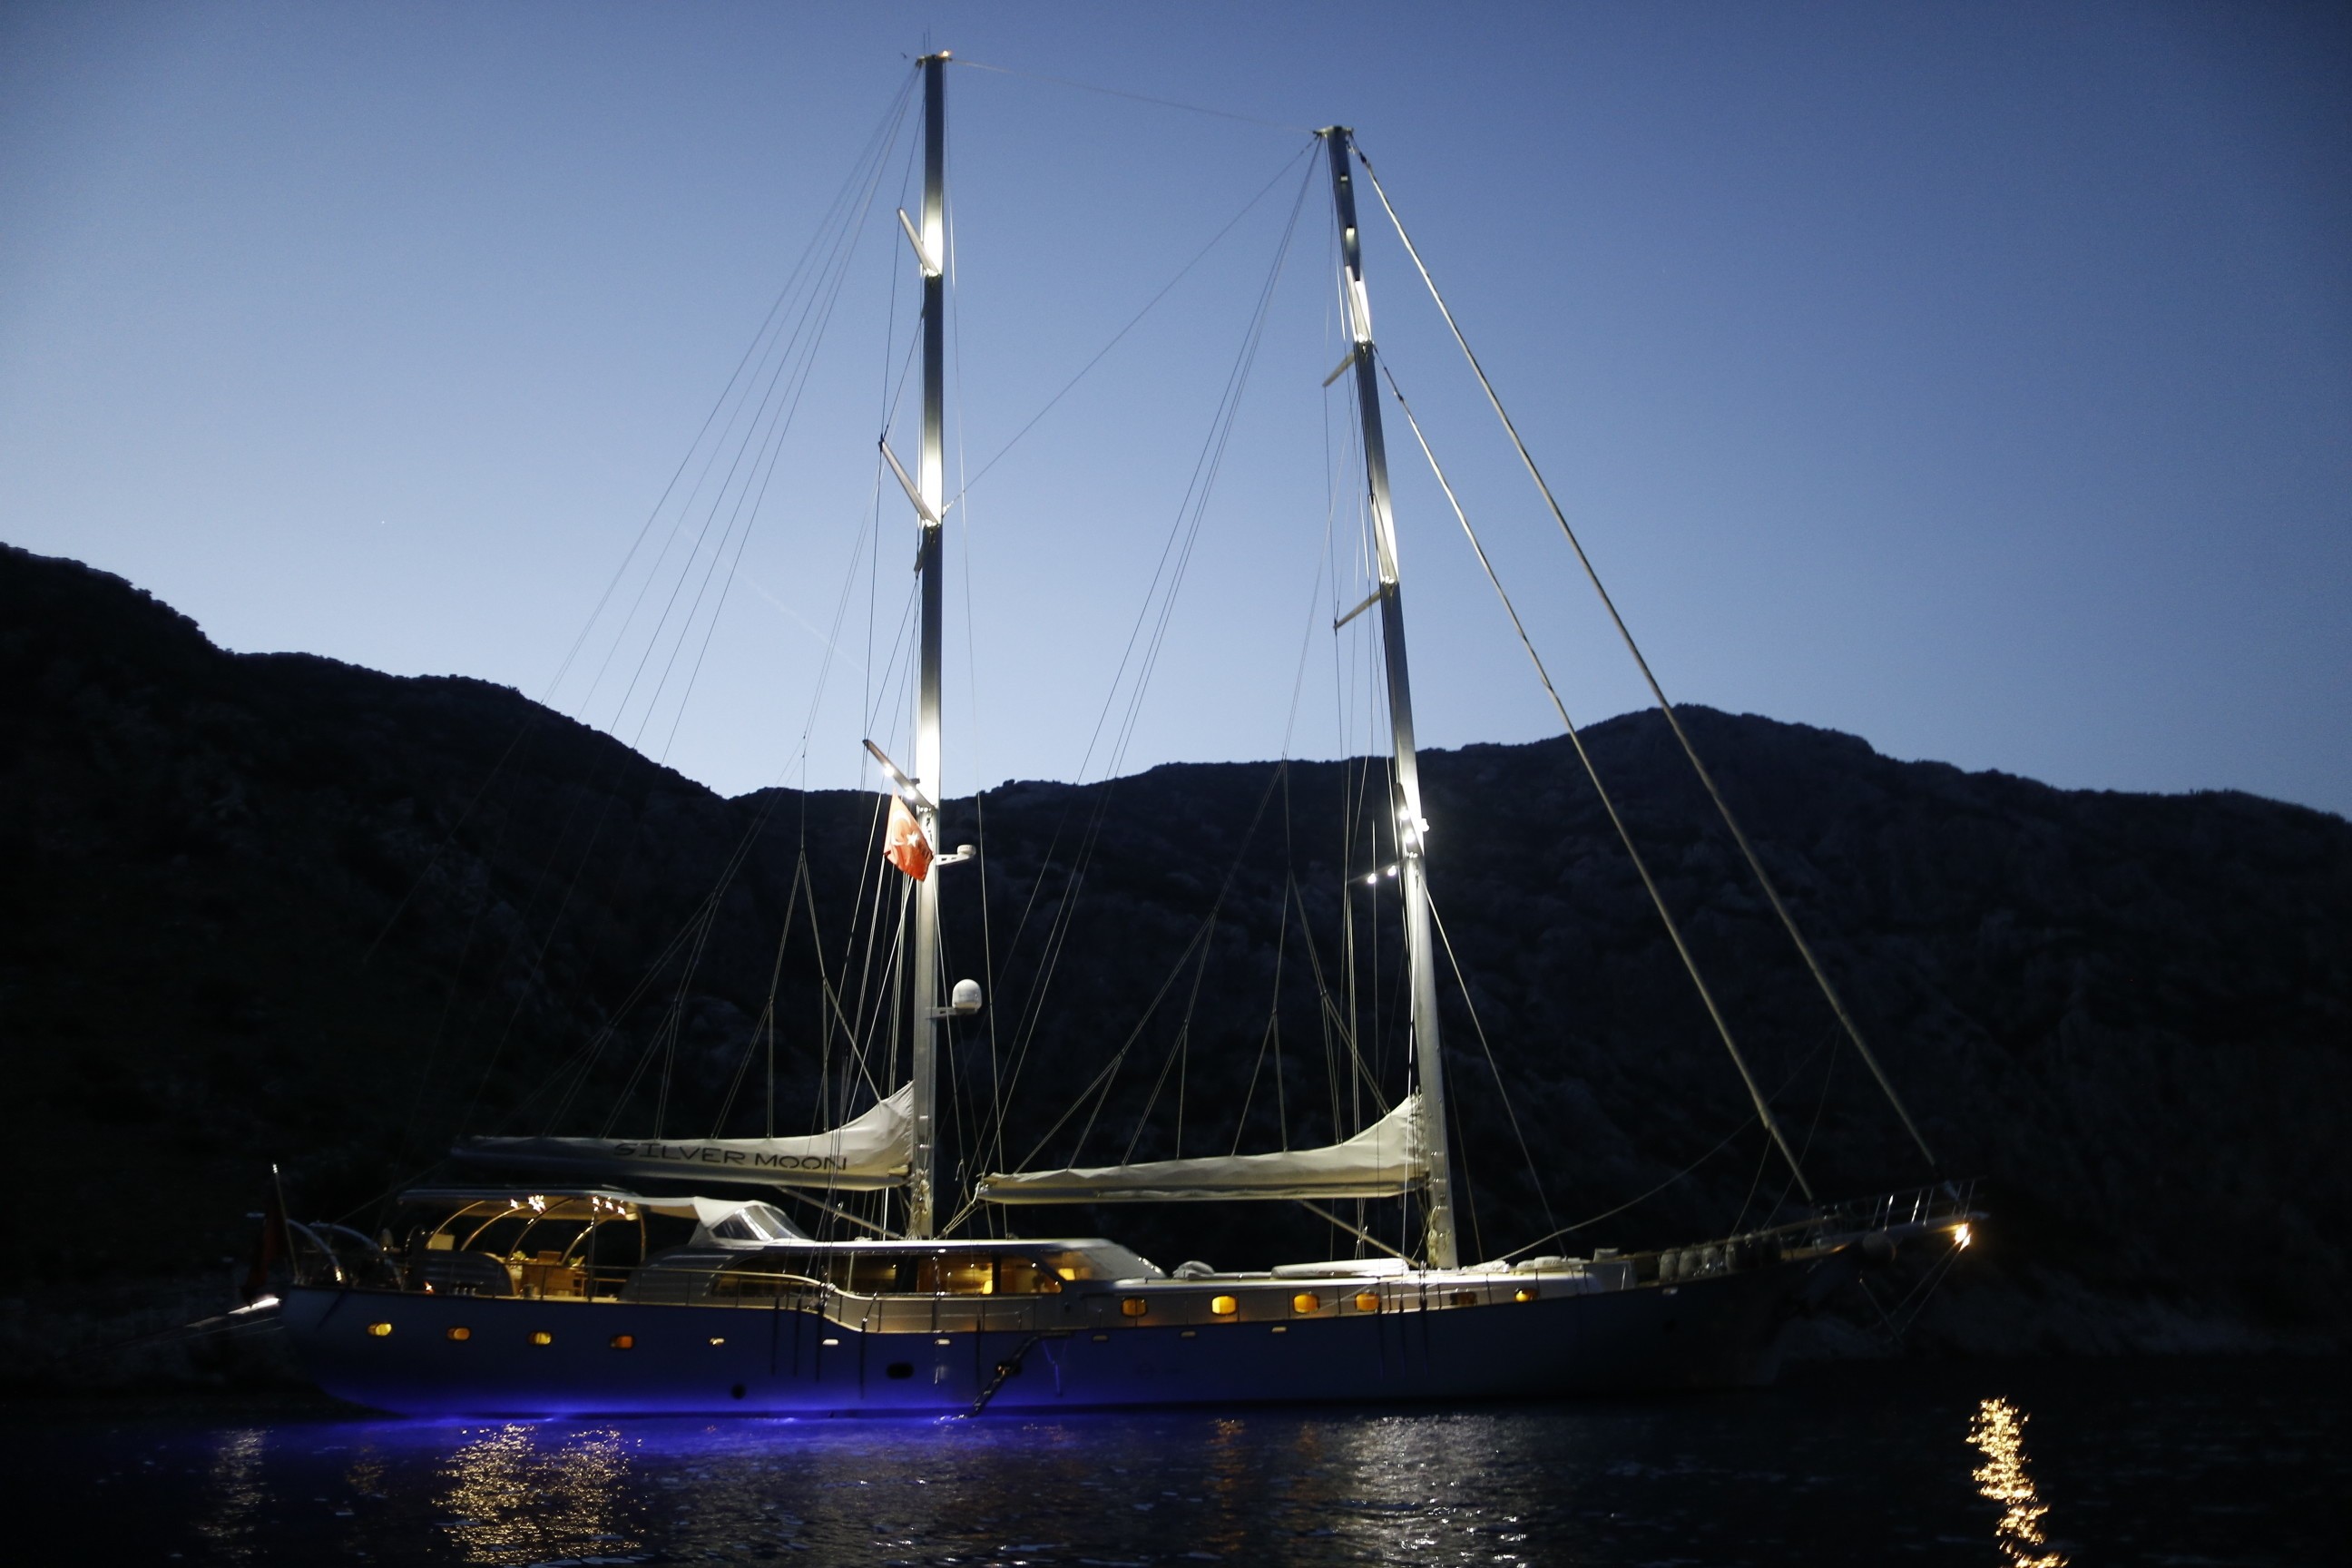 The 36m Yacht SILVER MOON